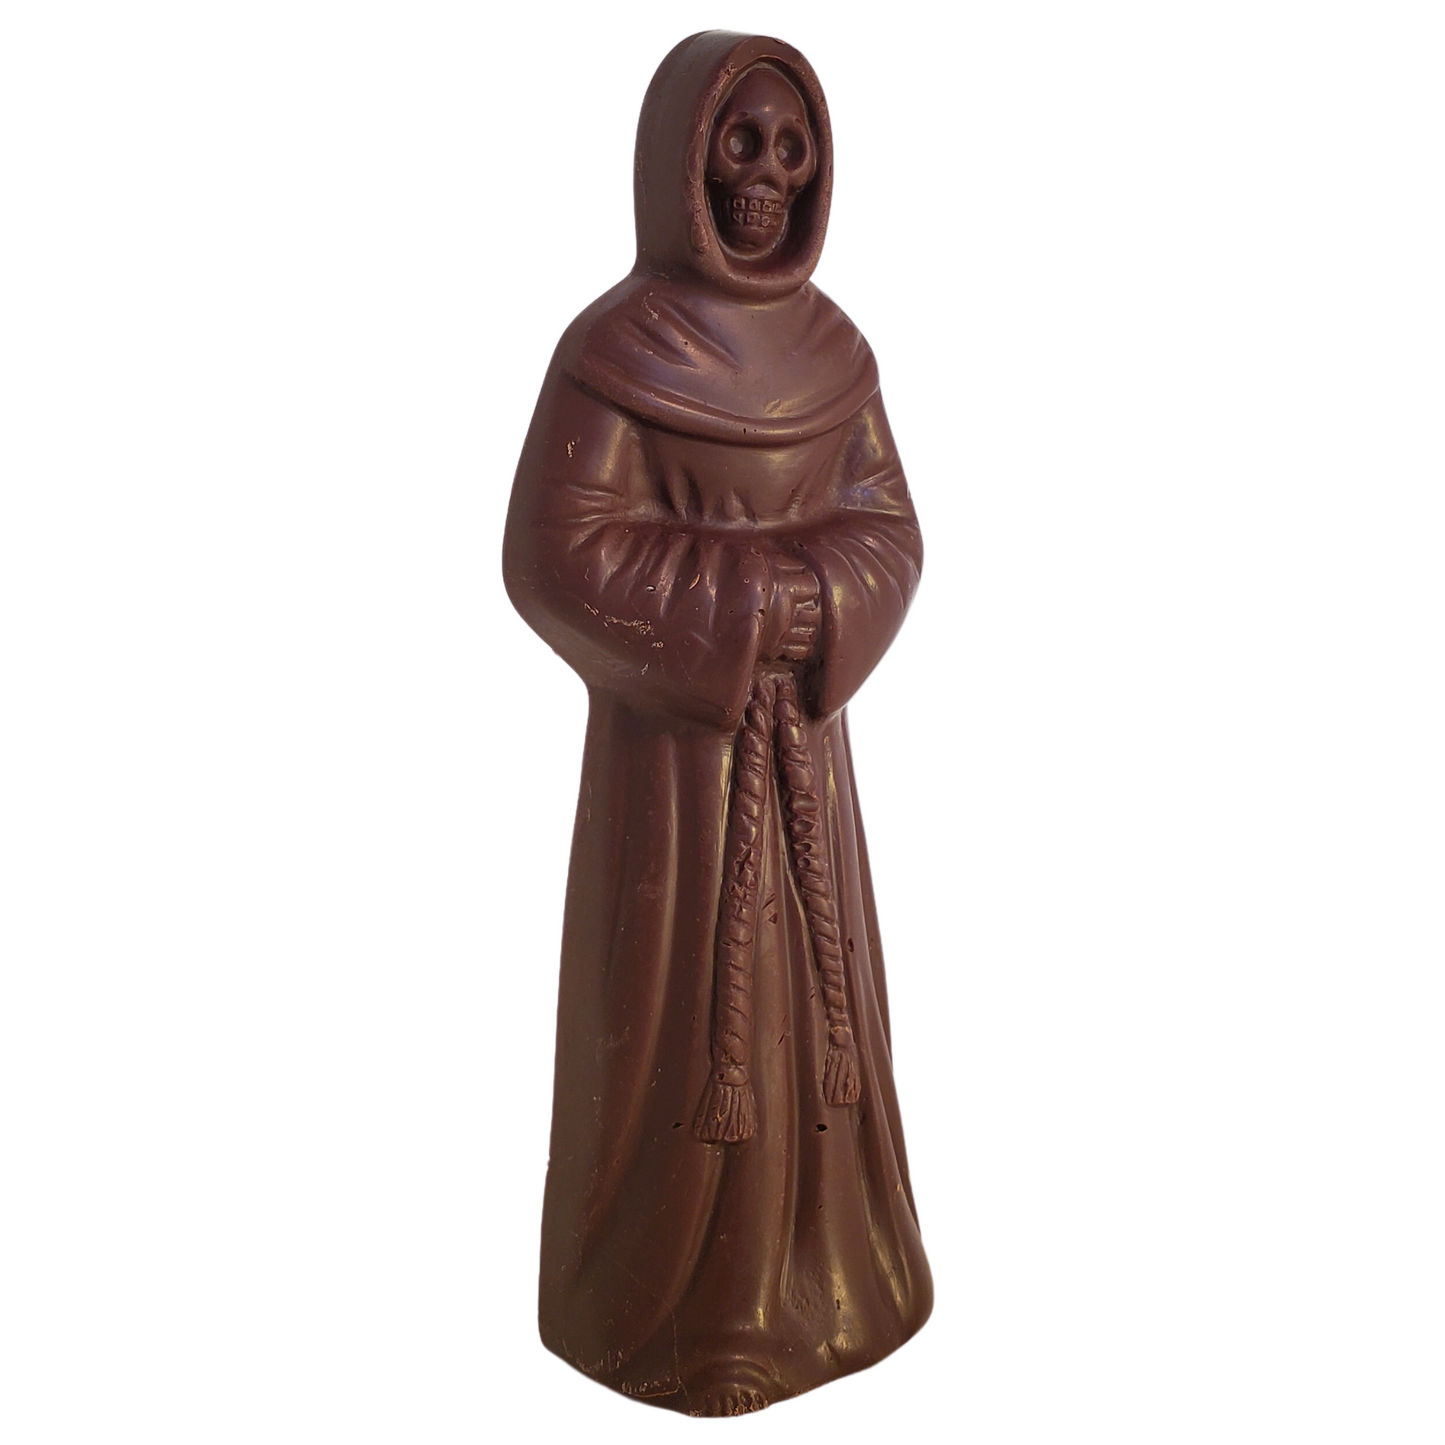 Dark chocolate figure of the Grim Reaper with a skull face and long robe, holding a rope..